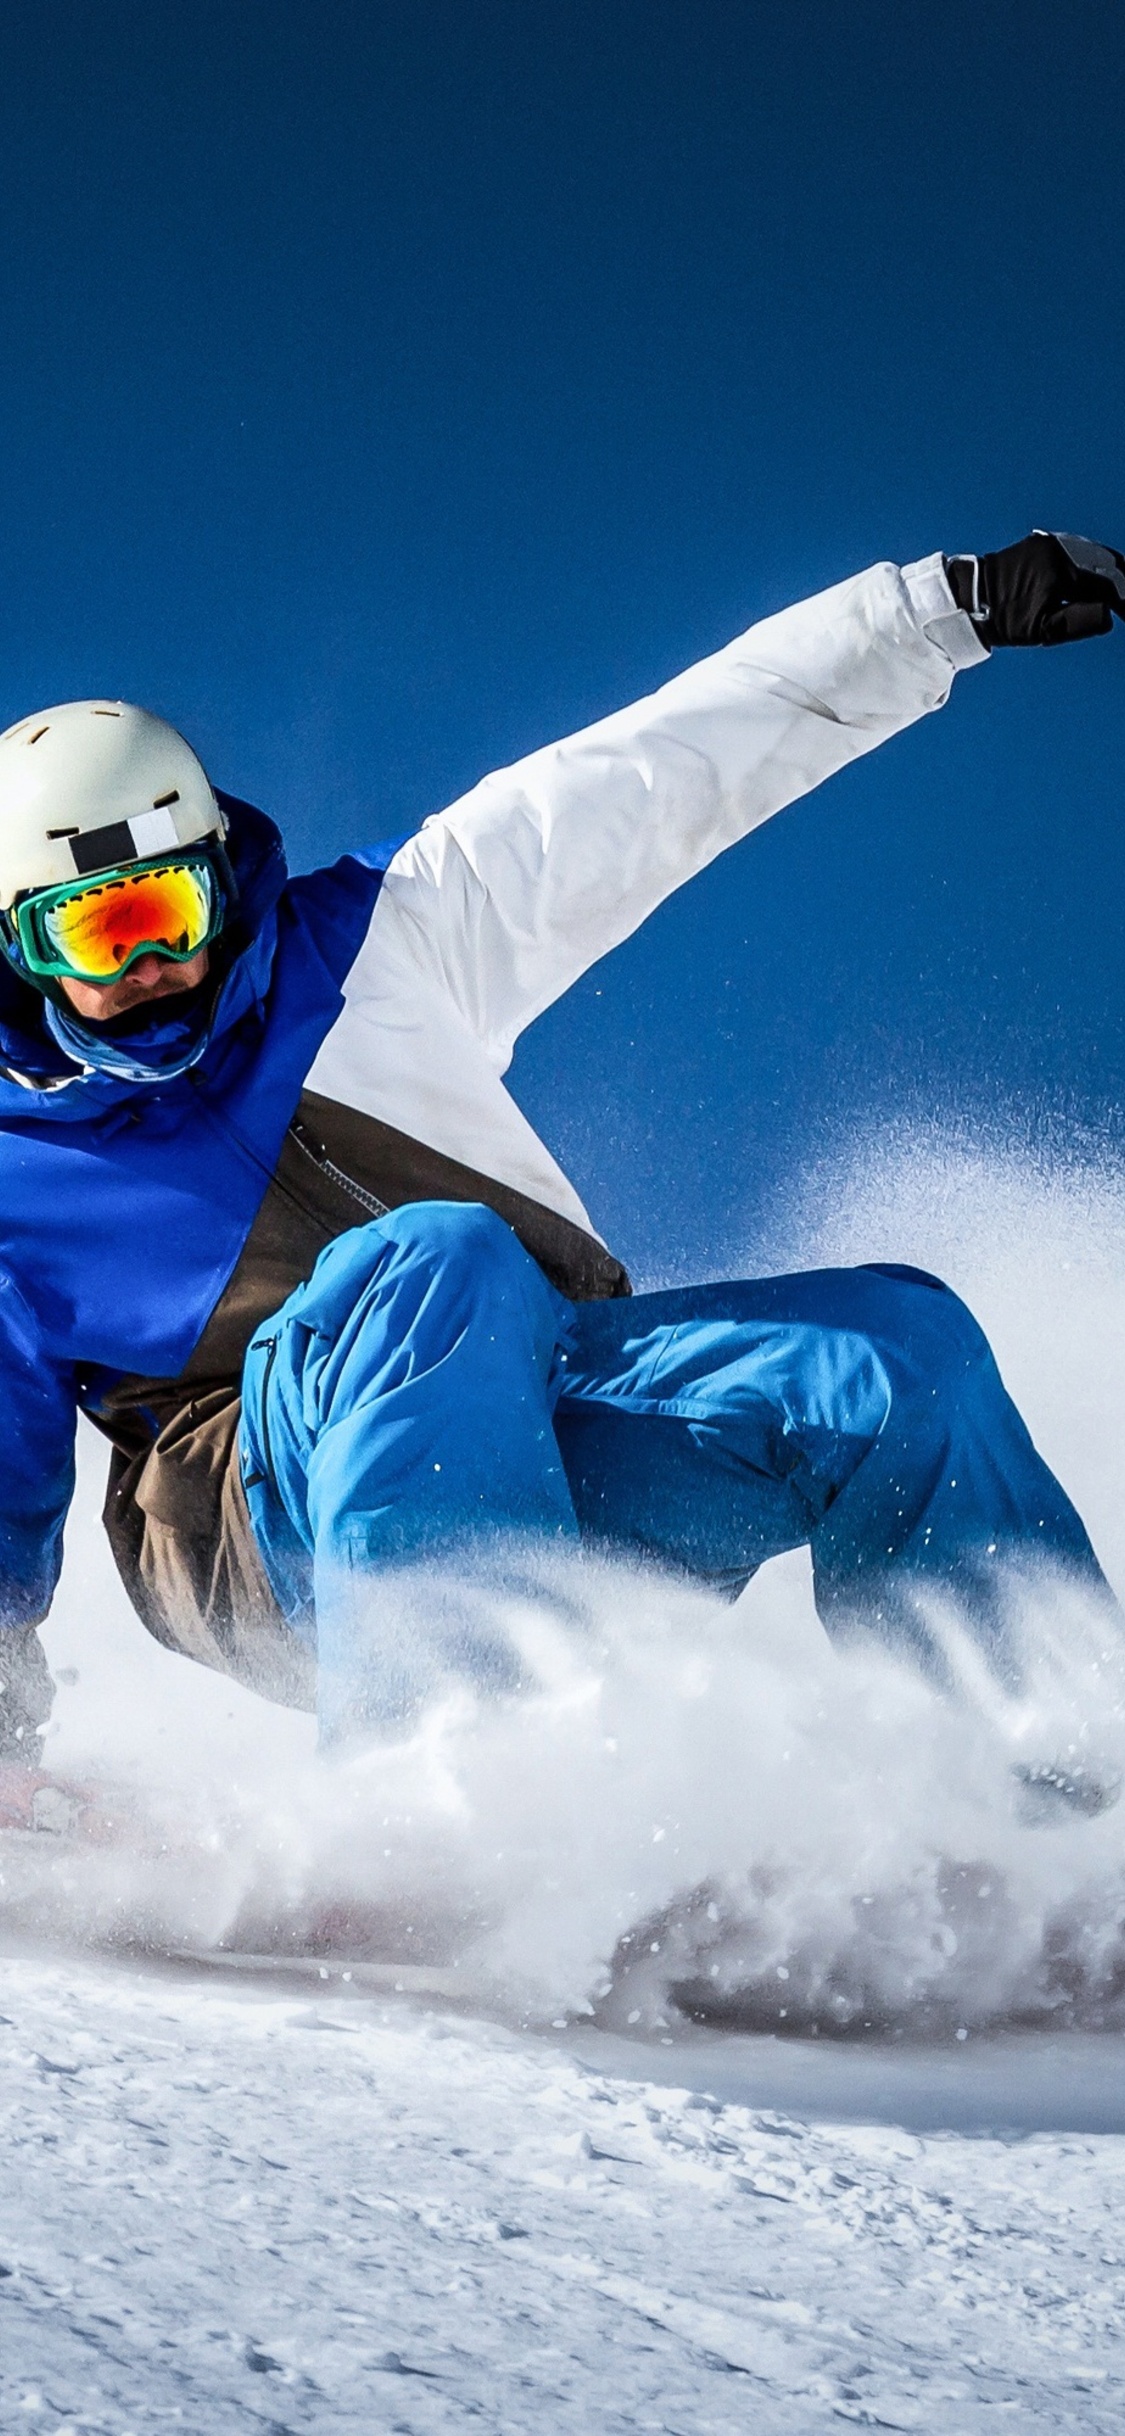 Download Snowboarding wallpapers for mobile phone free Snowboarding HD  pictures